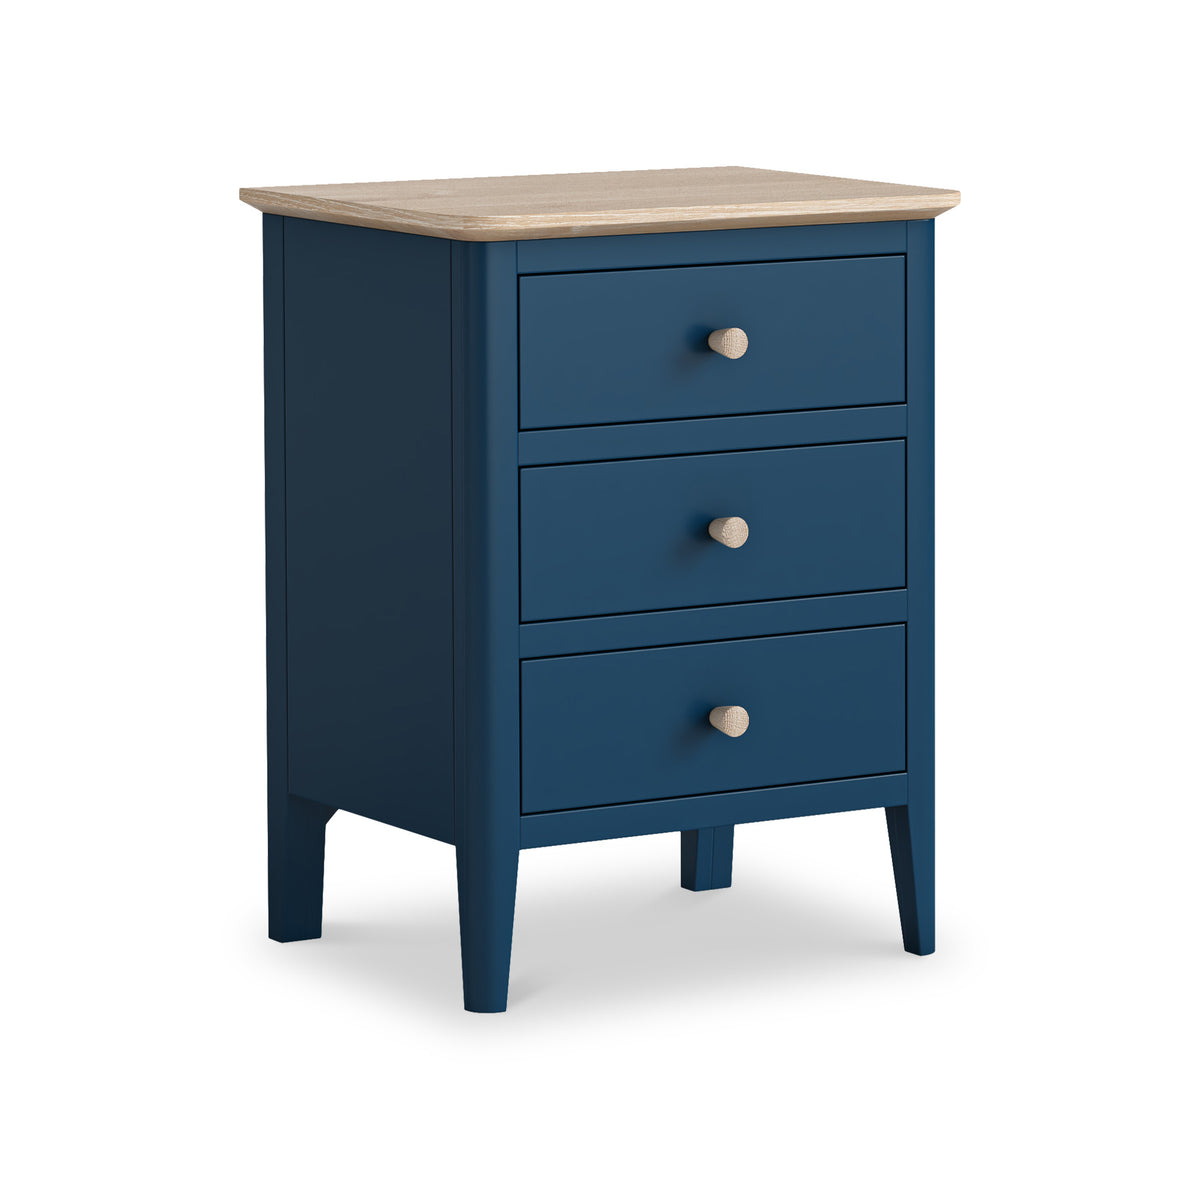 Penrose Navy Blue Bedside Table with wooden handles from Roseland Furniture